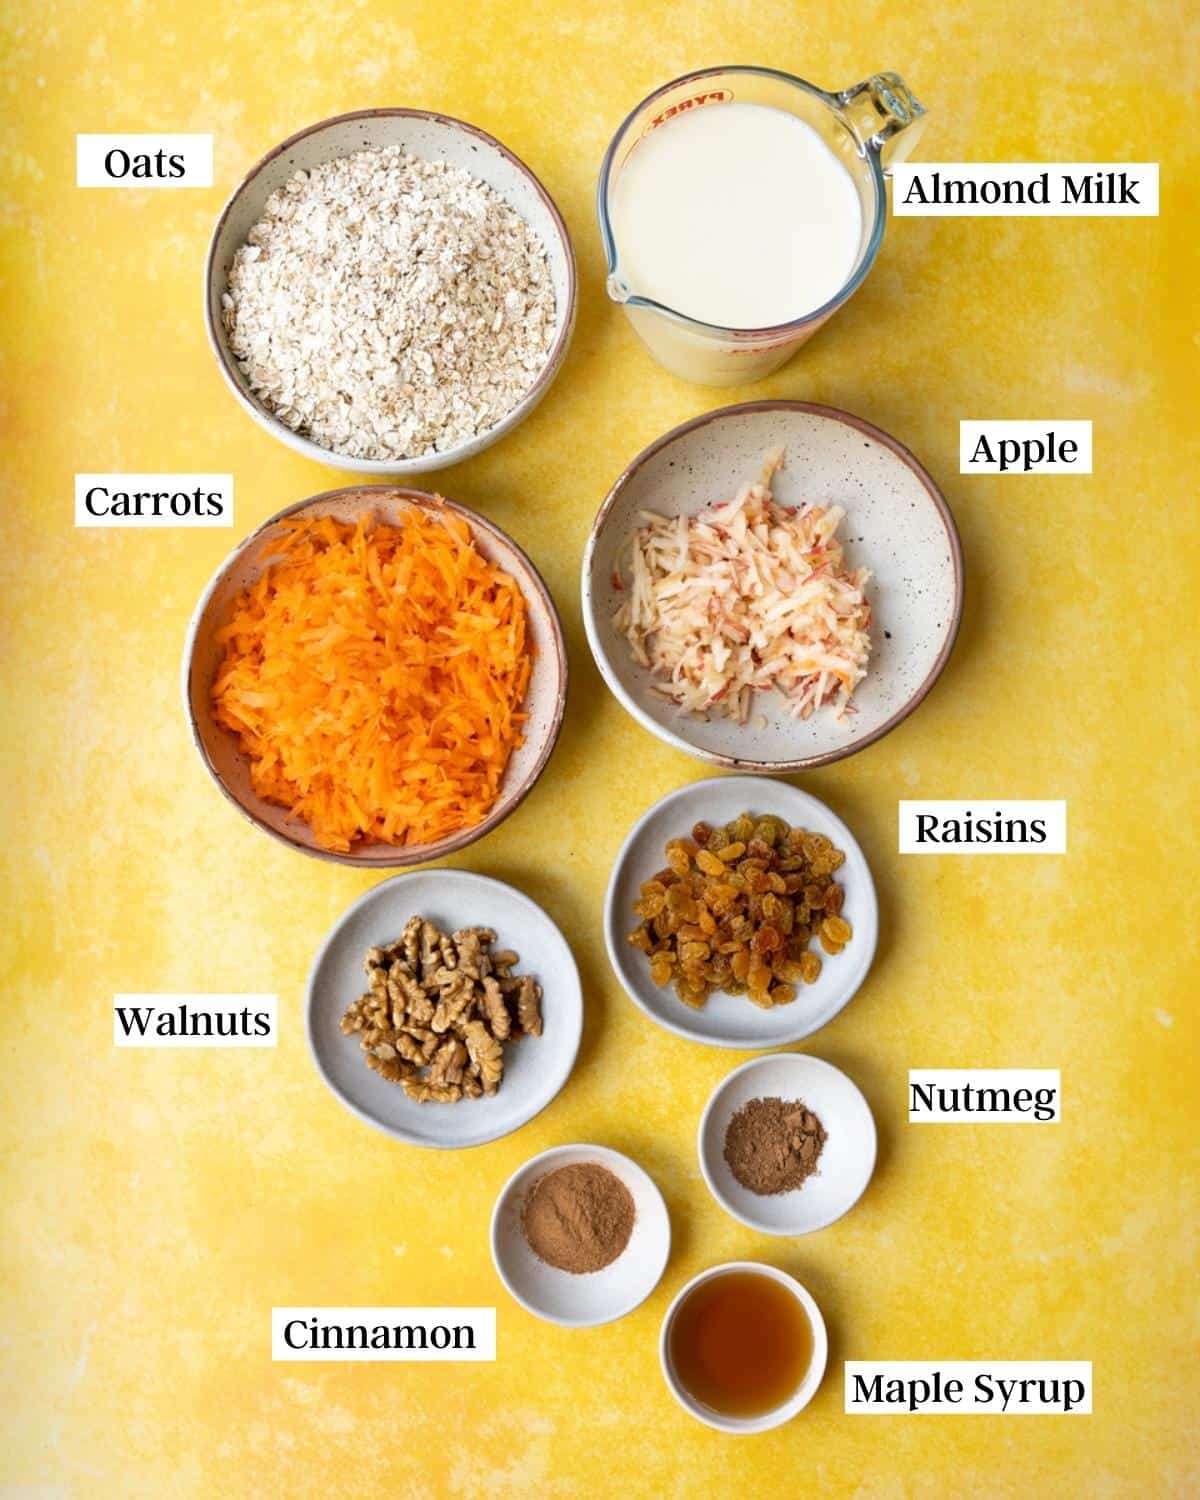 Ingredients for carrot cake porridge laid out in bowls on a yellow surface.